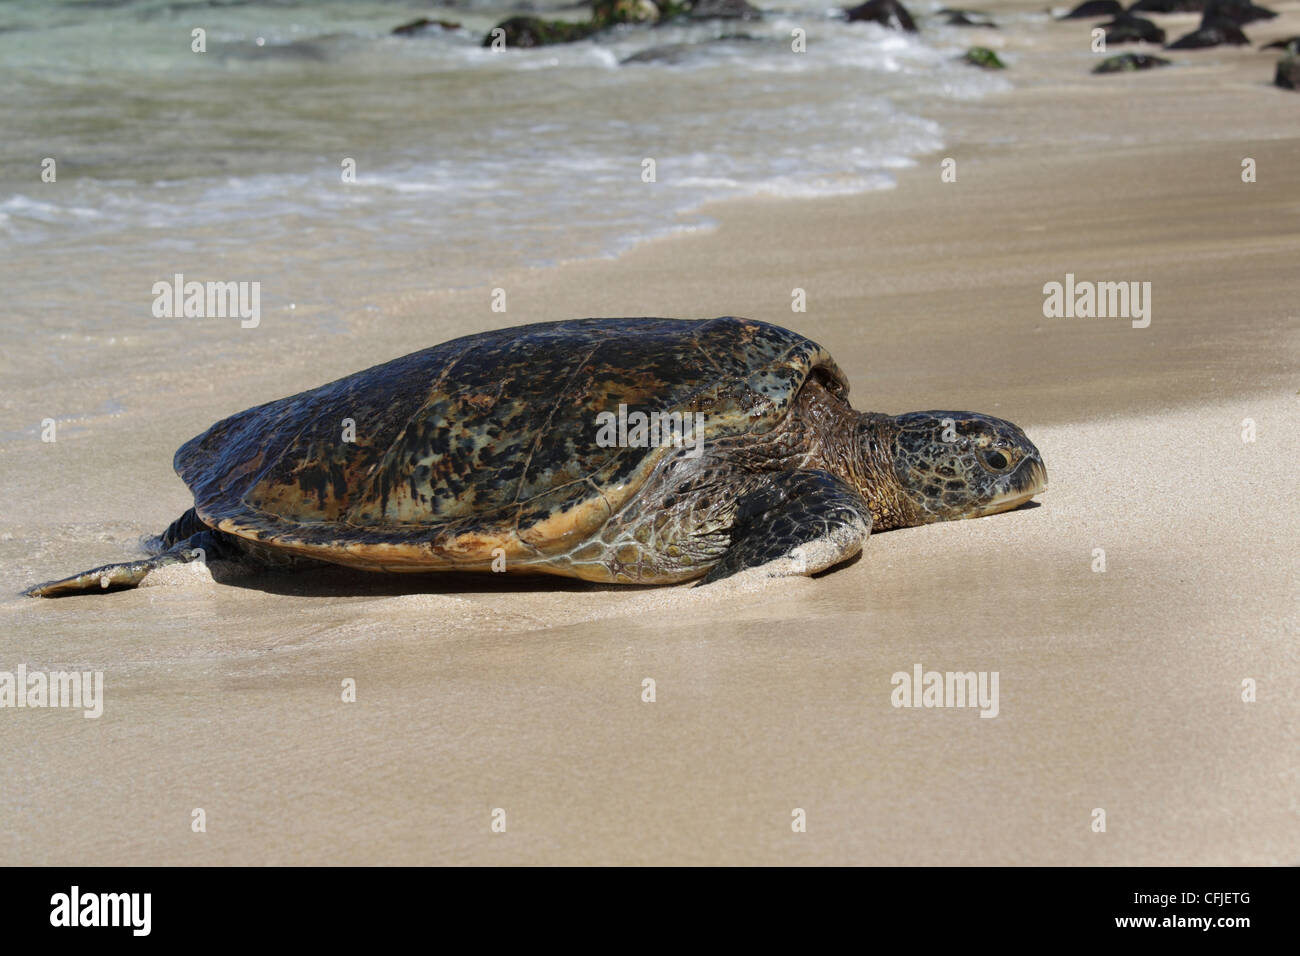 Hawaiian Green Sea Turtle (Chelonia mydas), Crawling ashore to rest and bask in the sun Stock Photo